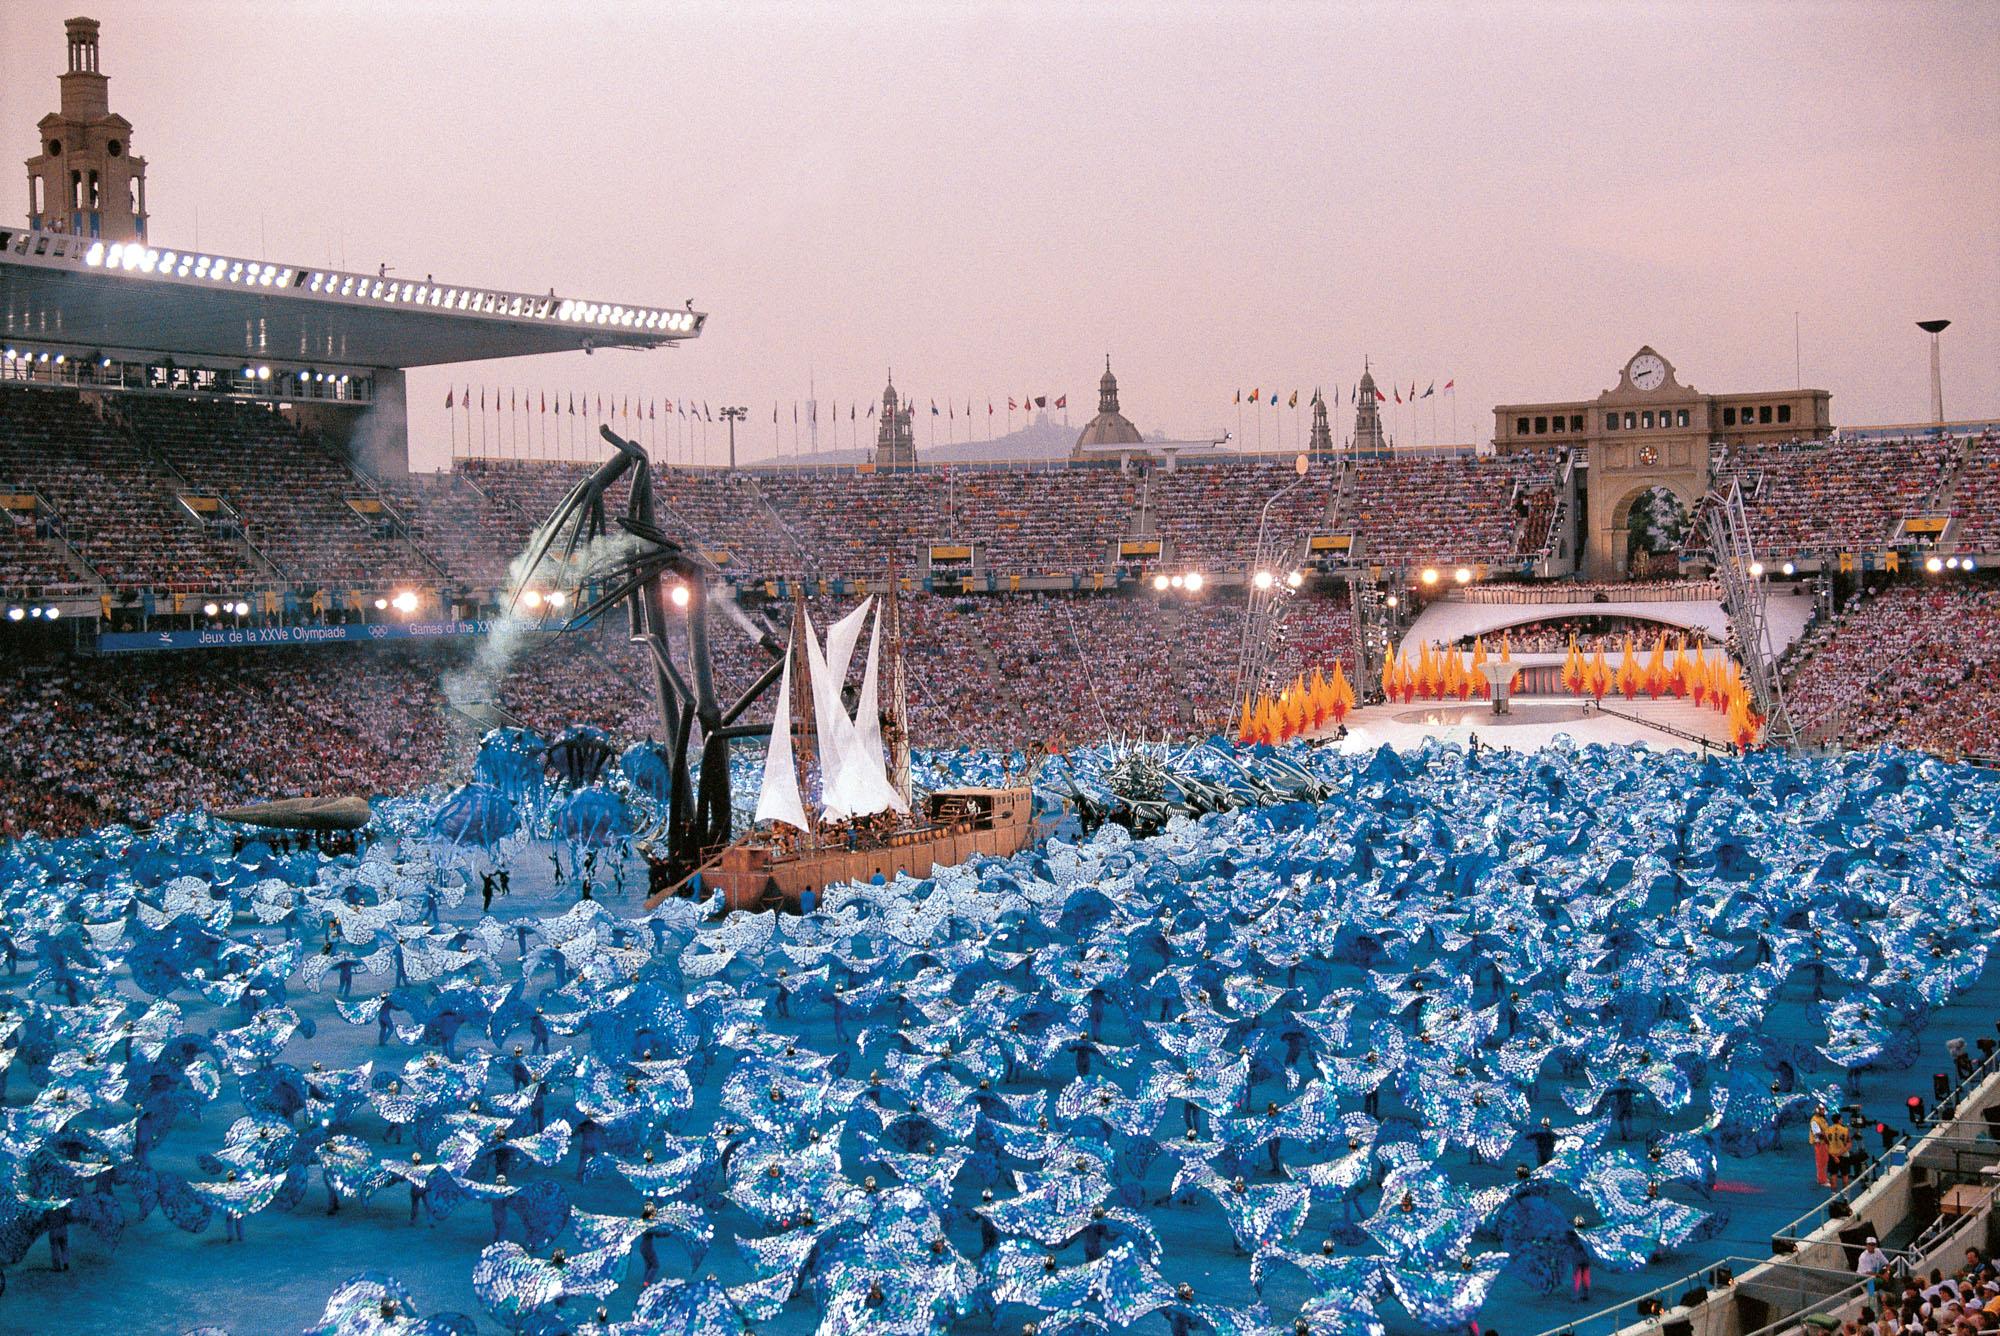 1992 Olympic games of Barcelona. Opening ceremony